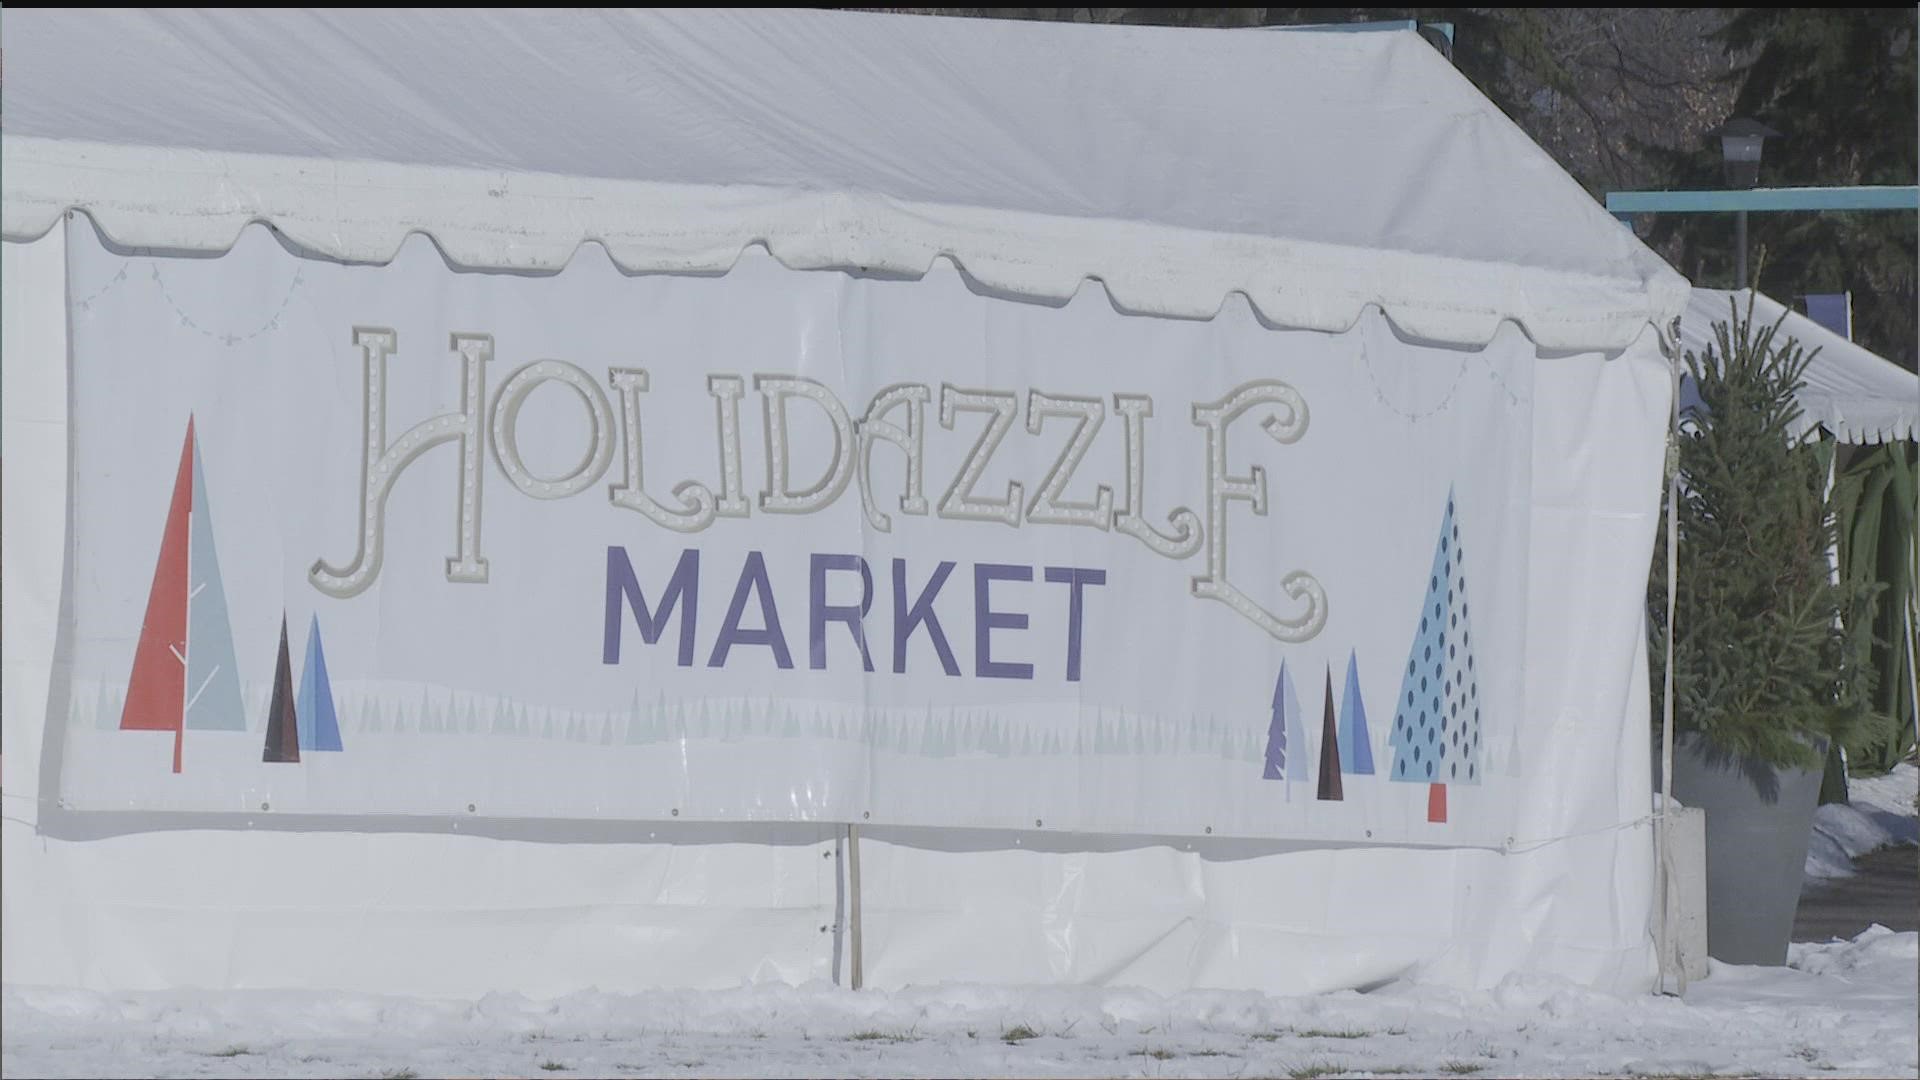 The annual holiday celebration and marketplace returns to Loring Park for four 3-day weekends.